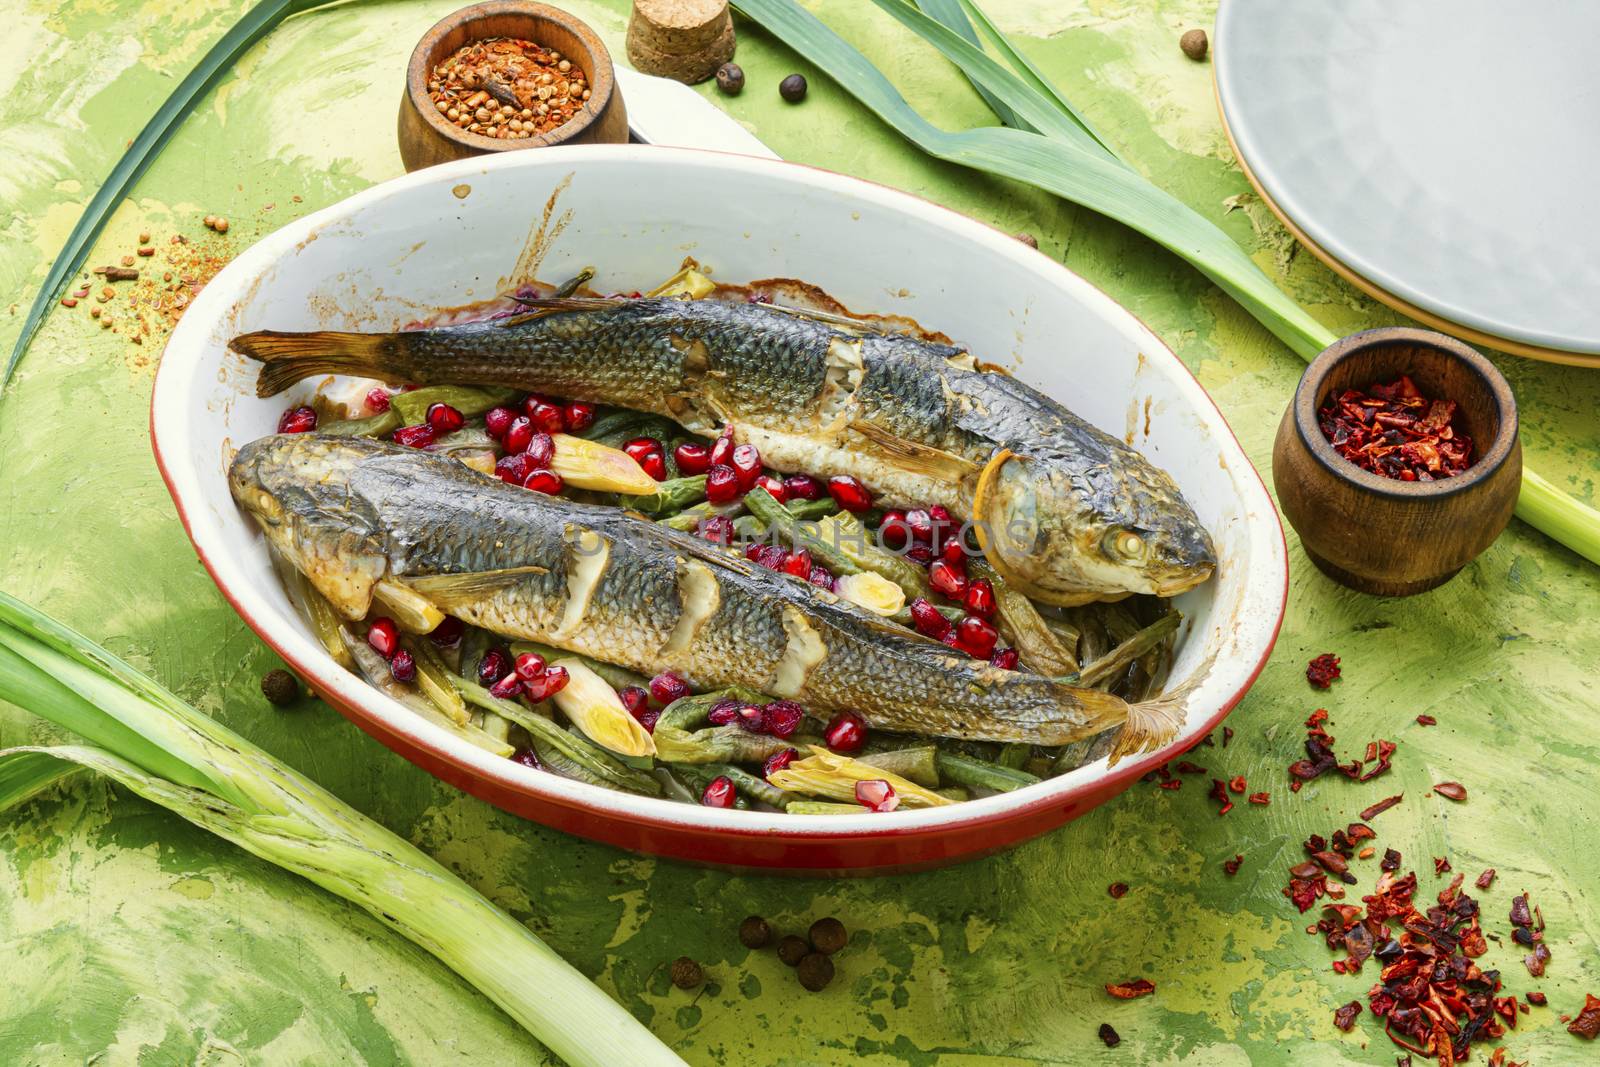 Pelengas baked with vegetables and pomegranate.Cooked roasted fish in a baking dish.